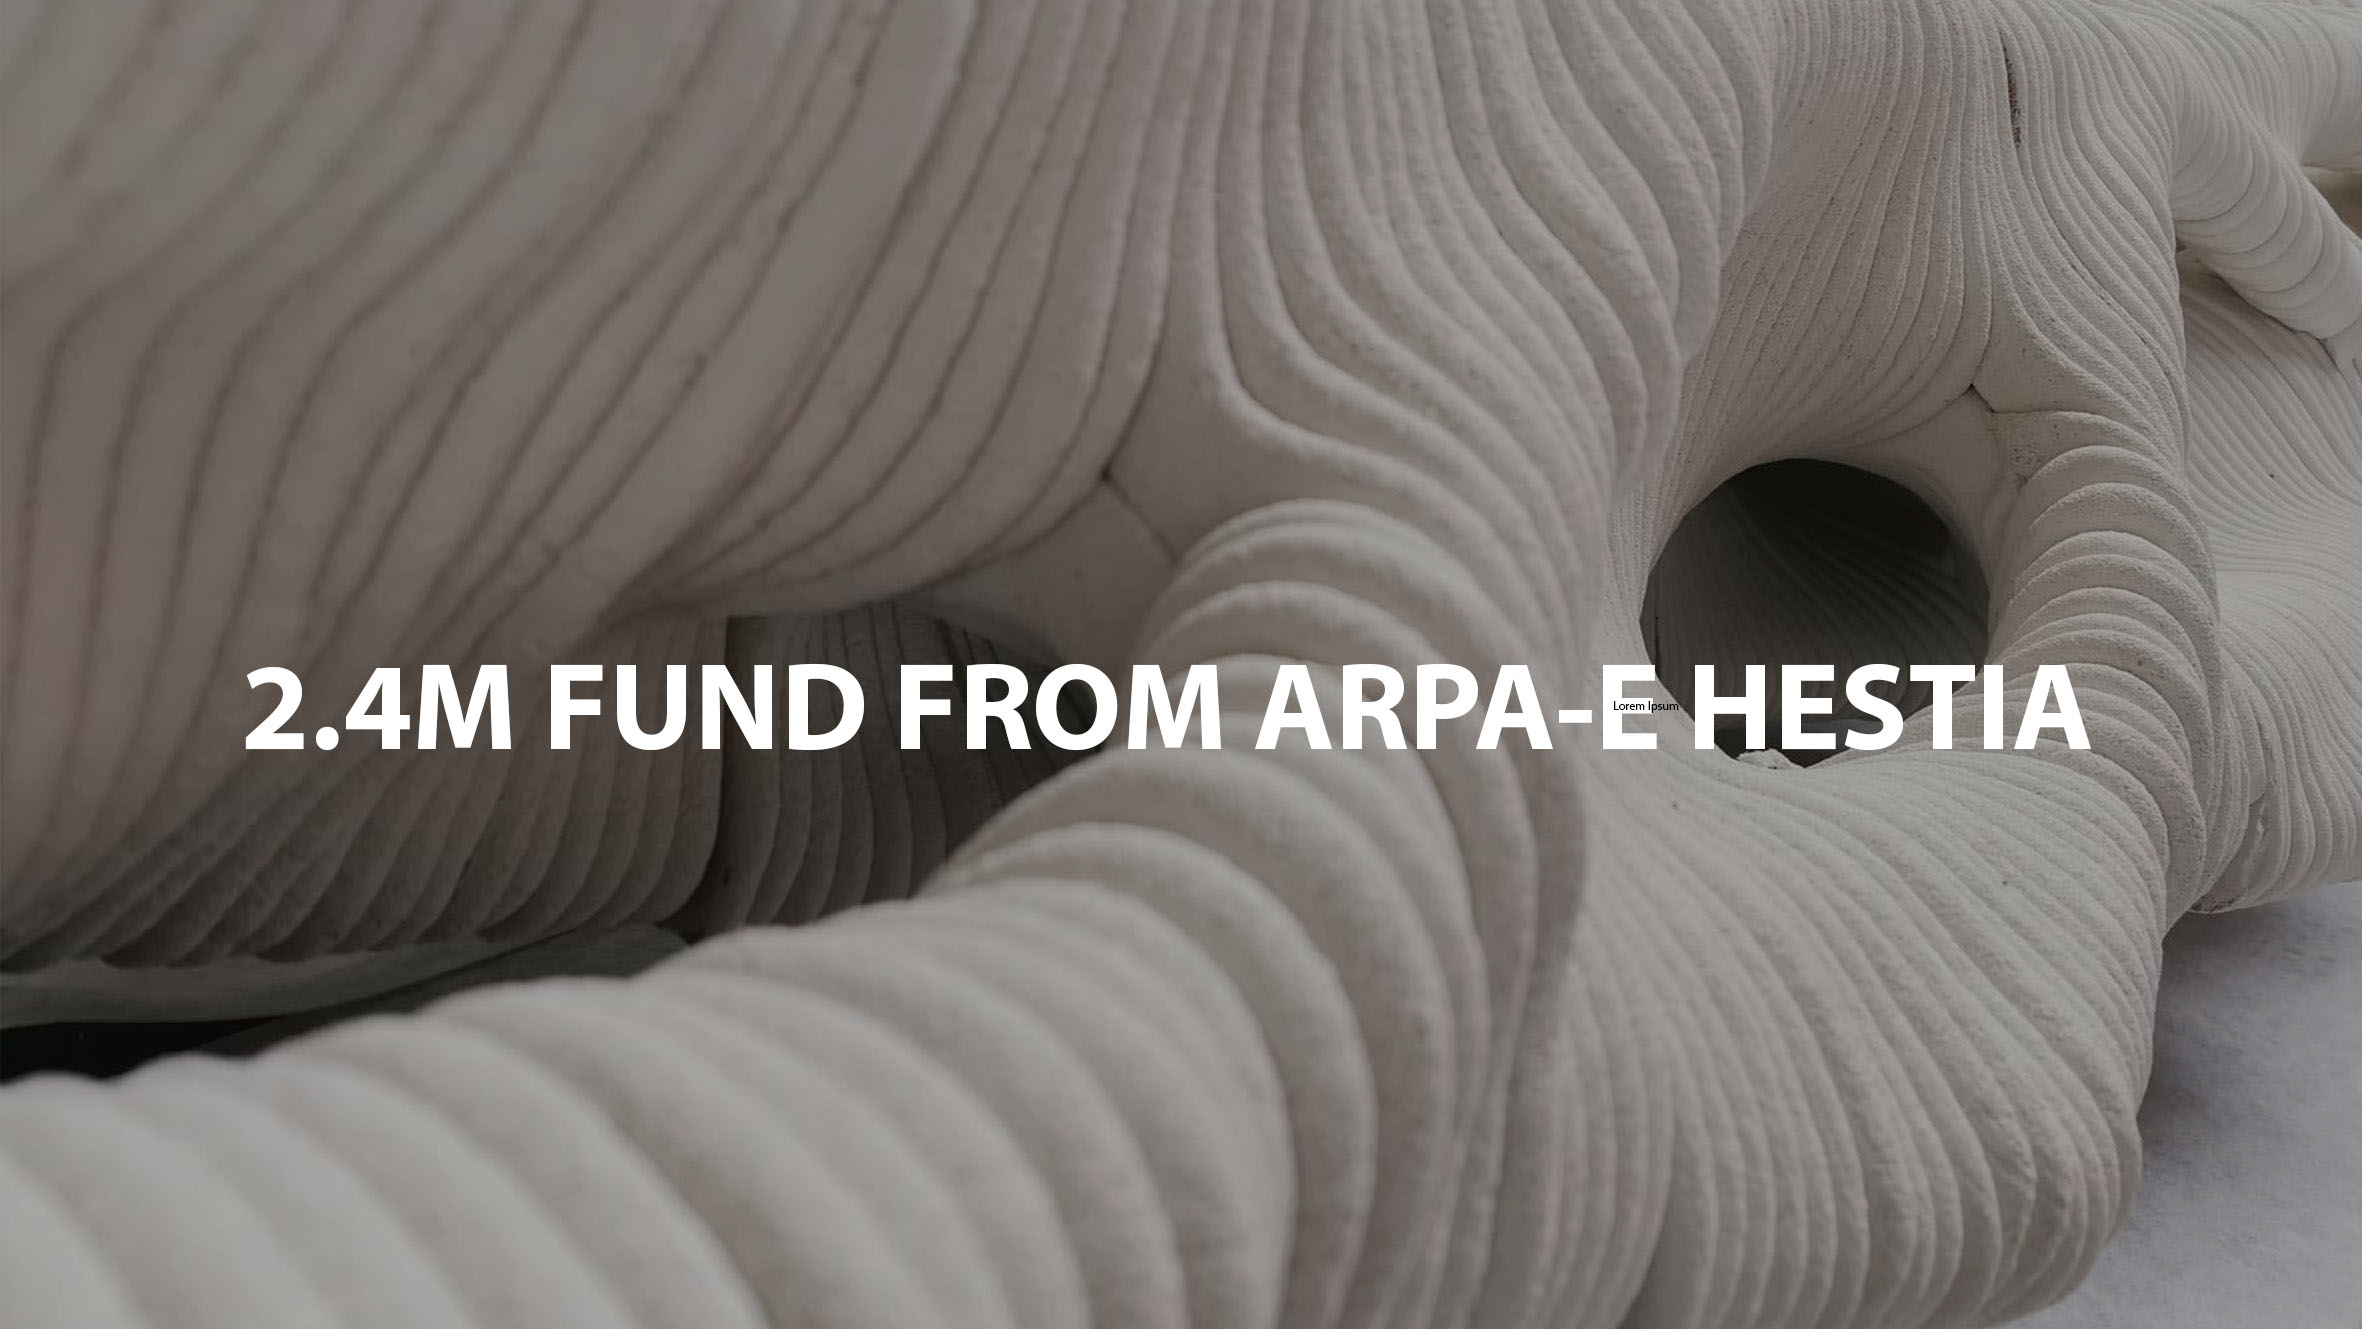 $2.4 Million ARPA-E Grant to Research the Design of Carbon-Negative Buildings